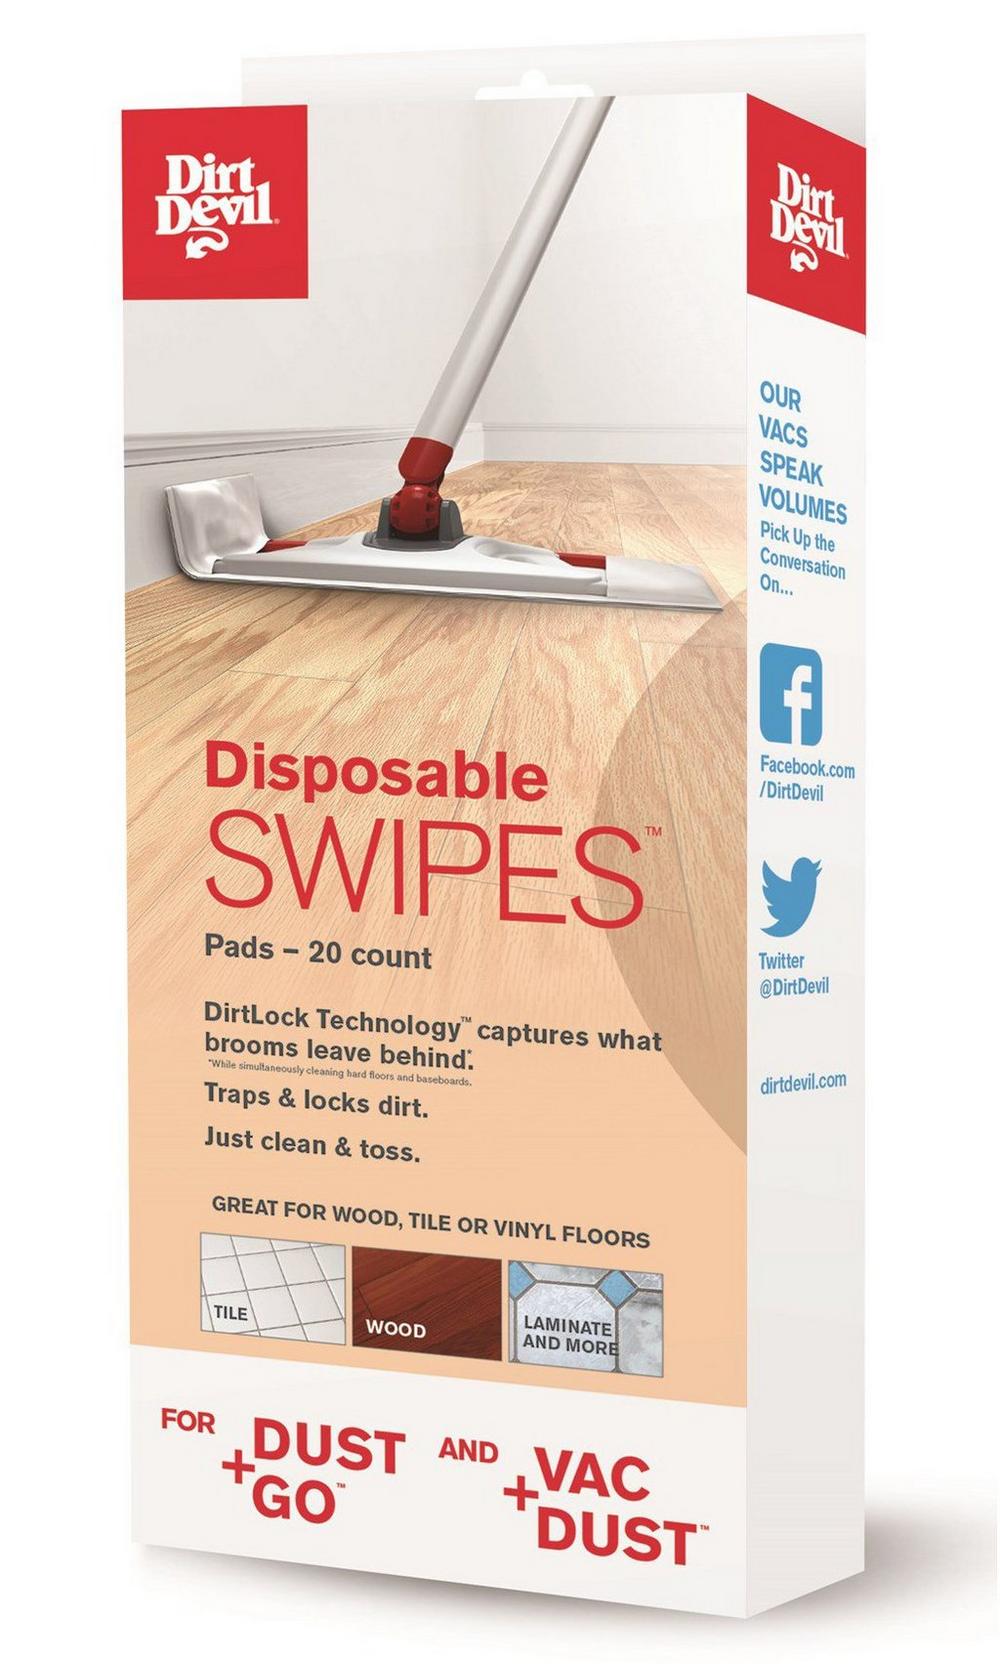 Disposable SWIPES Pads for Vac+Dust & Dust+Go (20 count)1